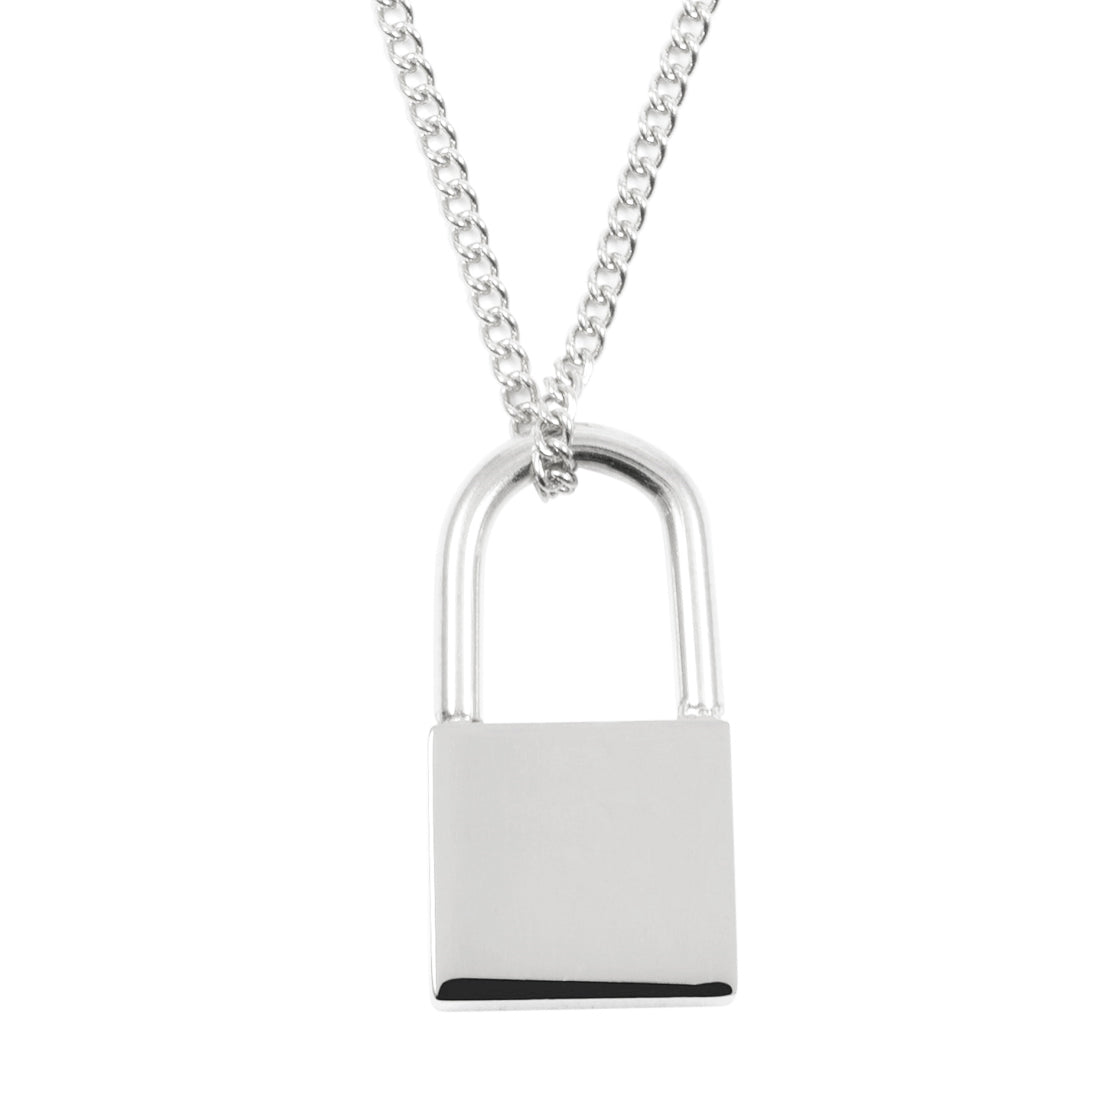 PADLOCK NECKLACE - Gold / Silver